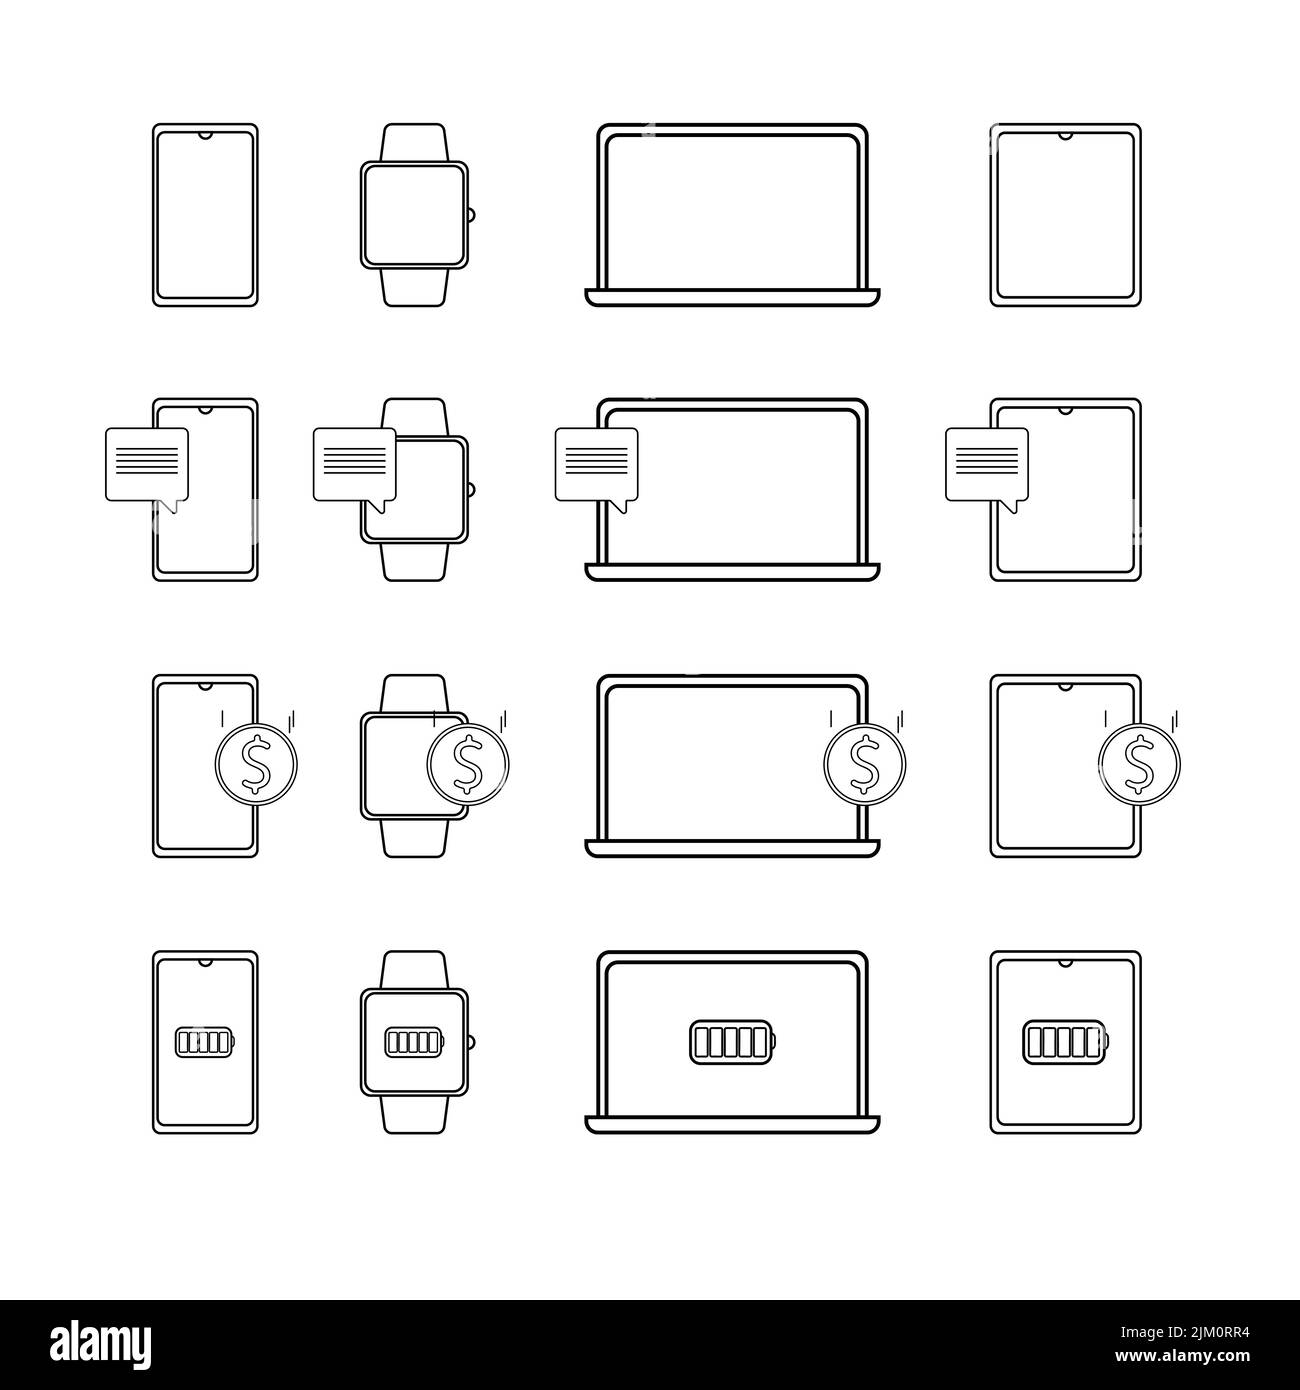 Icons set of electronic devices. Stock Vector